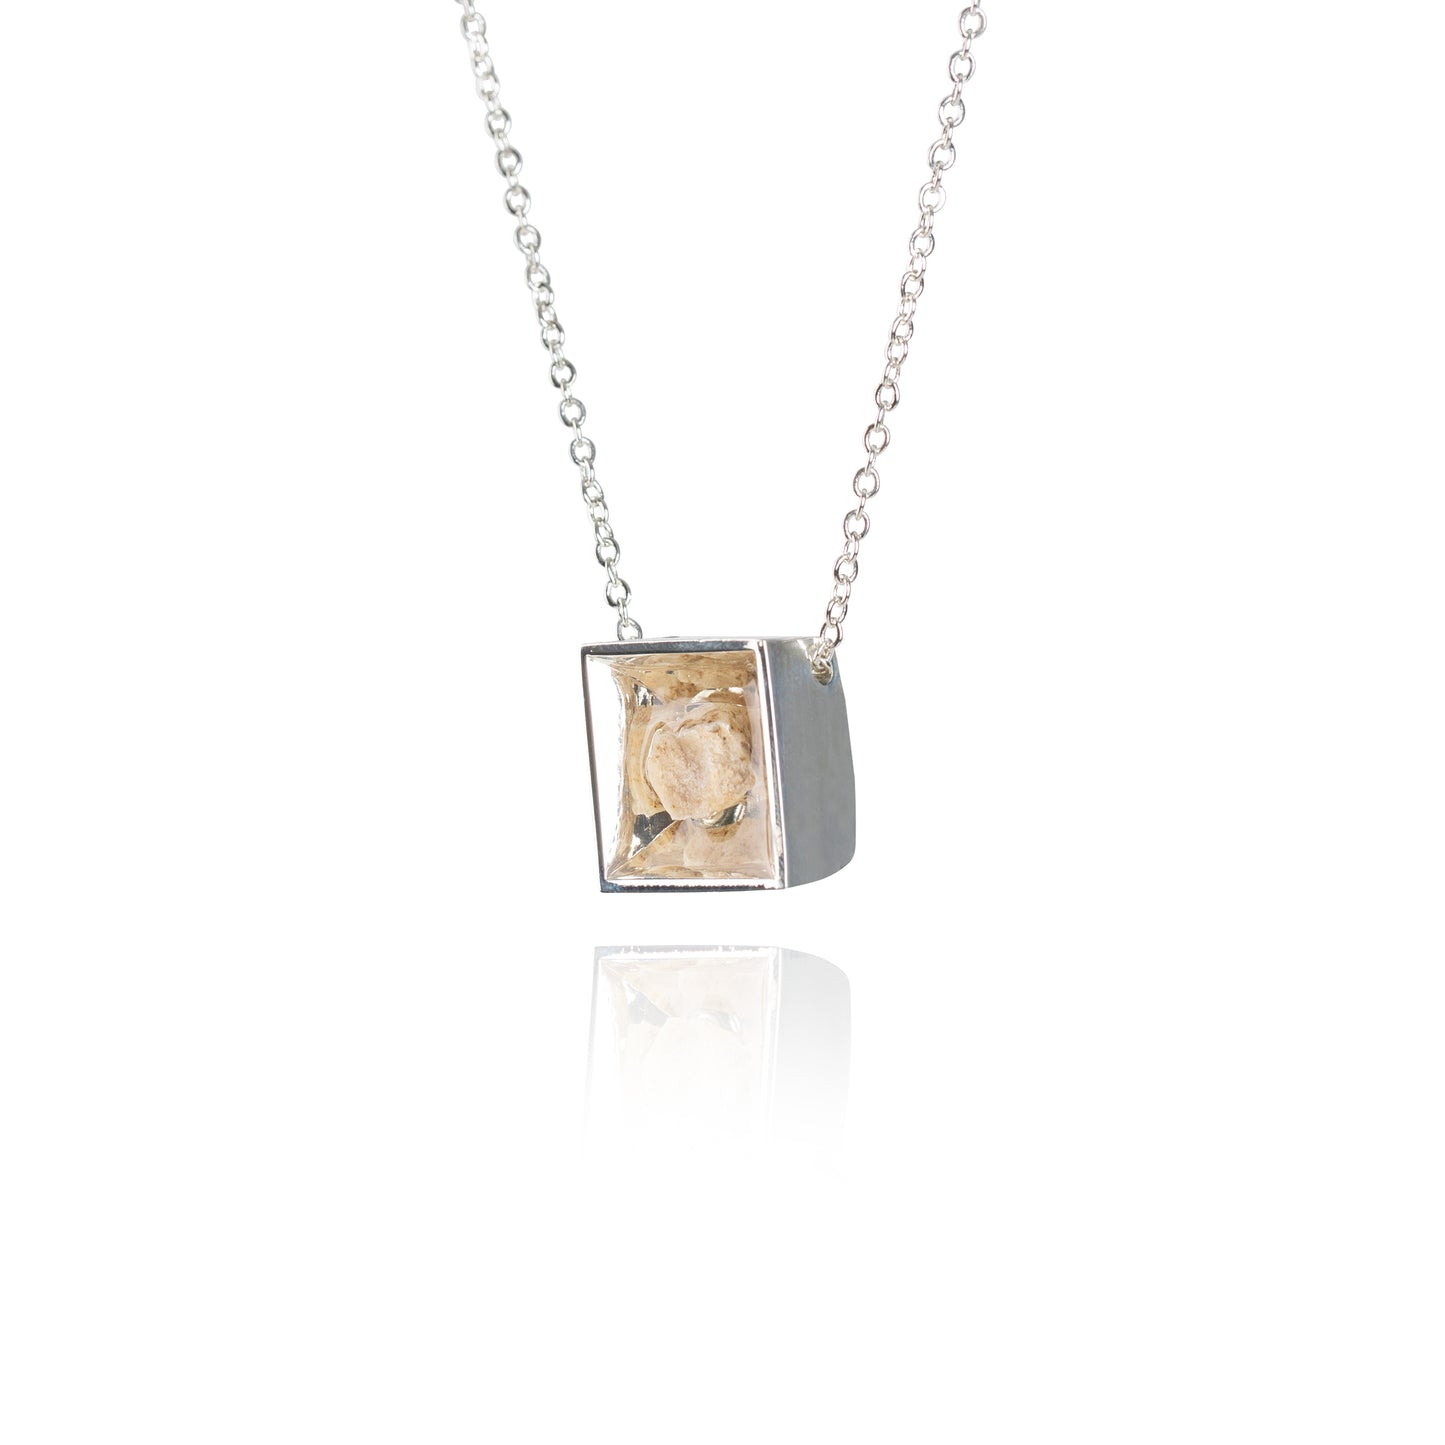 A side view of a small natural tan stone sitting in the middle of a square shaped metal pendant in a silver color. The pendant is hanging on a silver chain.